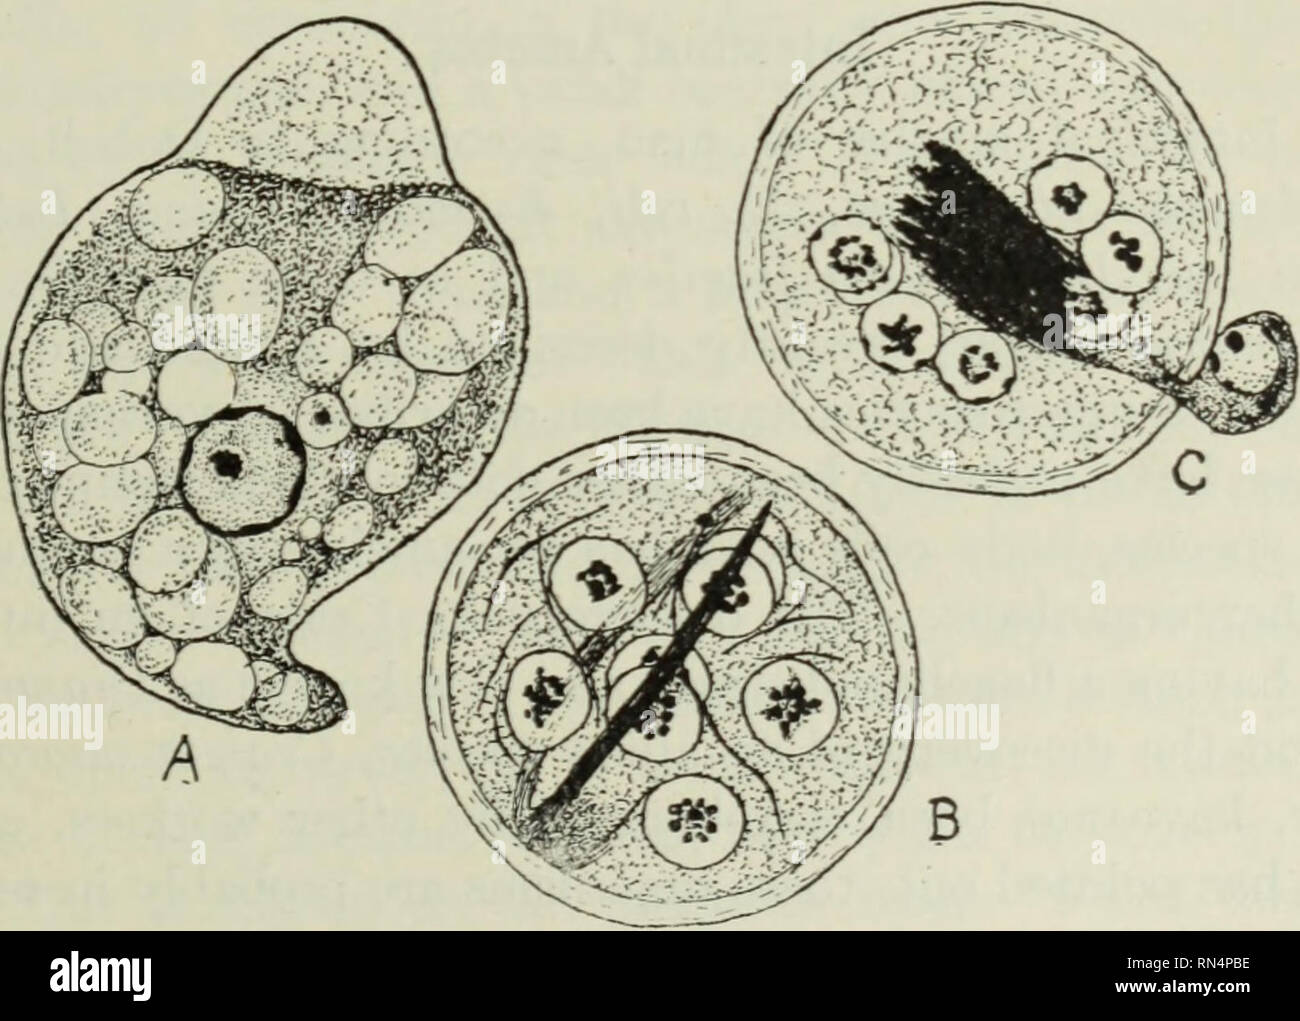 . Animal parasites and human disease. Parasites; Medical parasitology; Insects as carriers of disease. Fig. 40. Dientamoeba fragilis. X 1650. A, stained vegetative ameba. show- ing two nuclei with granular karyosomes, and lood vacuoles; B, living ameba, showing leaf-like pseudopodia. (A, after. Dobell; B, after Jepps and Dobcll.). Fig. 41. Councilmania lafleuri. X 1650. A, stained vegetative ameba with a pseudopodium in early phase of protrusion and one nearly retracted and filled with endoplasm; nucleus showing peripheral chromatin and large irregular, ec- centric karyosome; endoplasm filled  Stock Photo